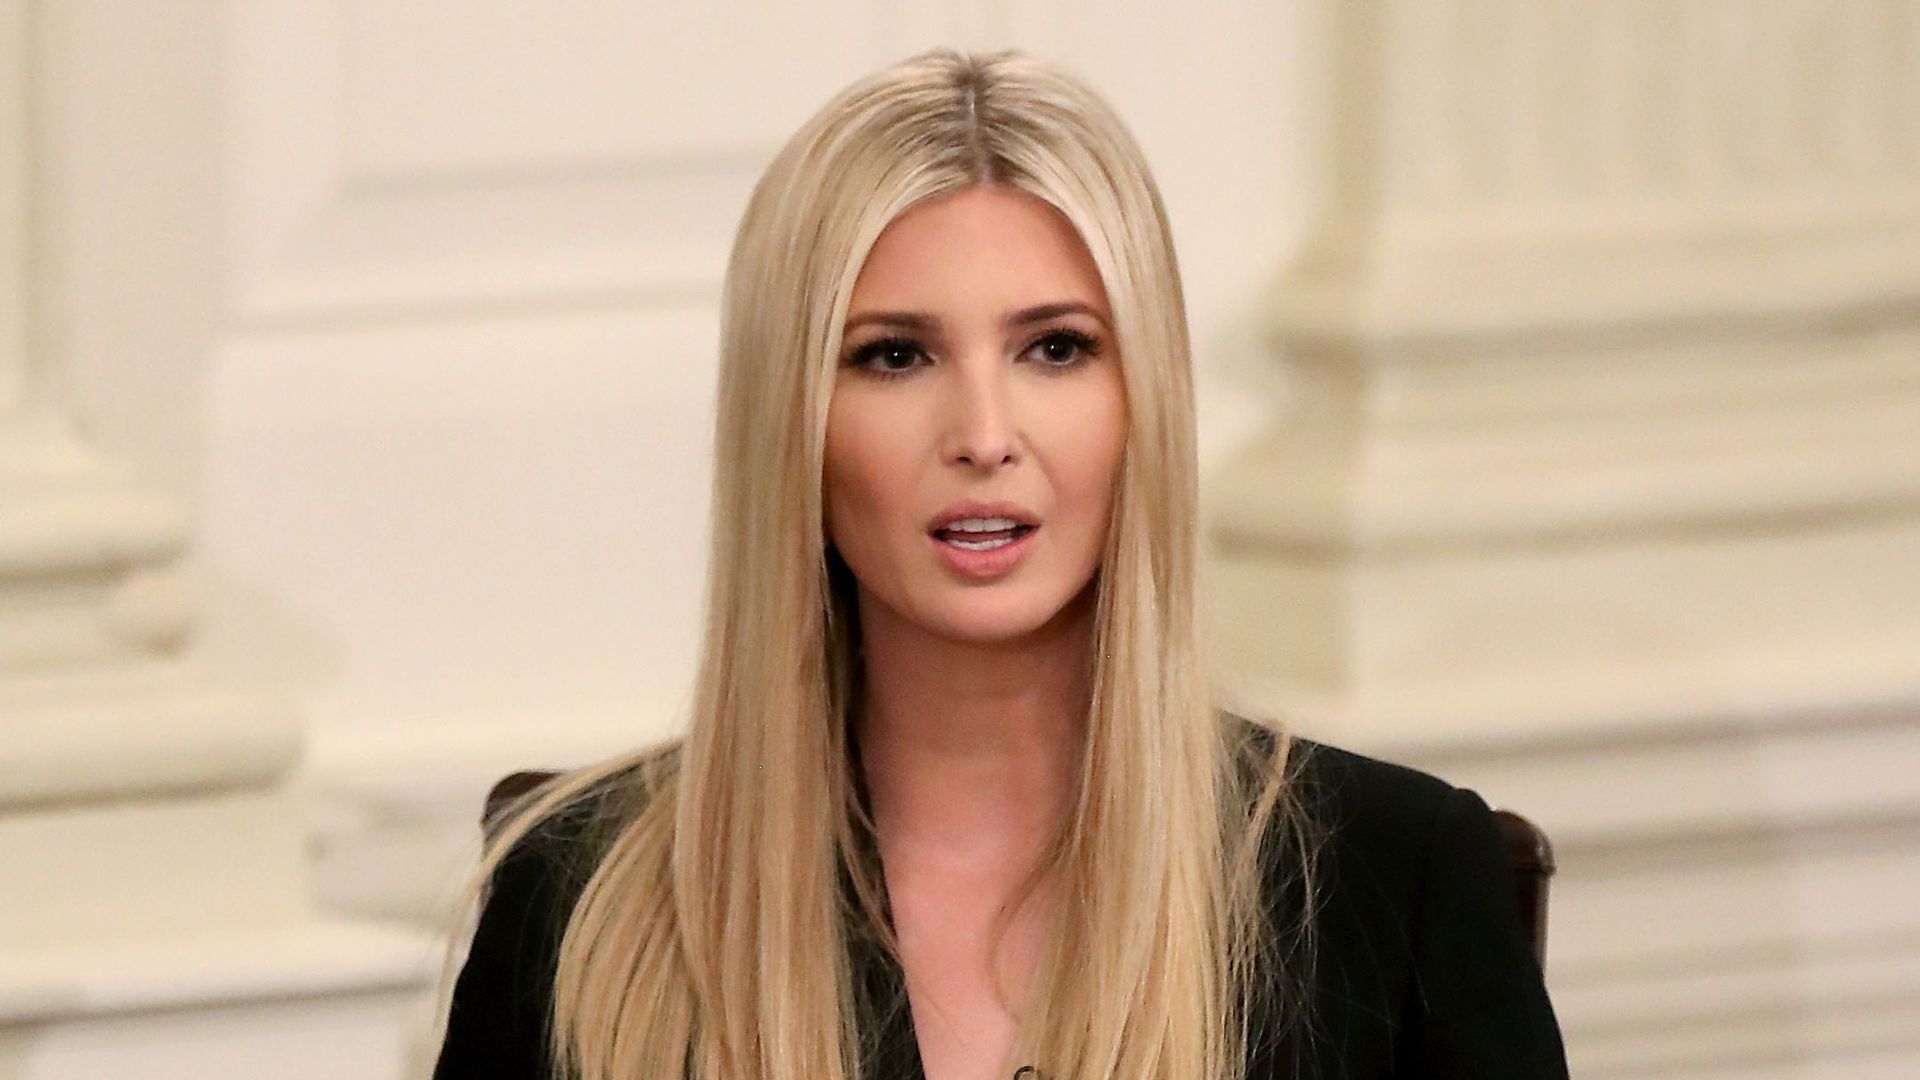 Ivanka Trump discussed the economic agenda of her father's administration in the Fox News broadcast